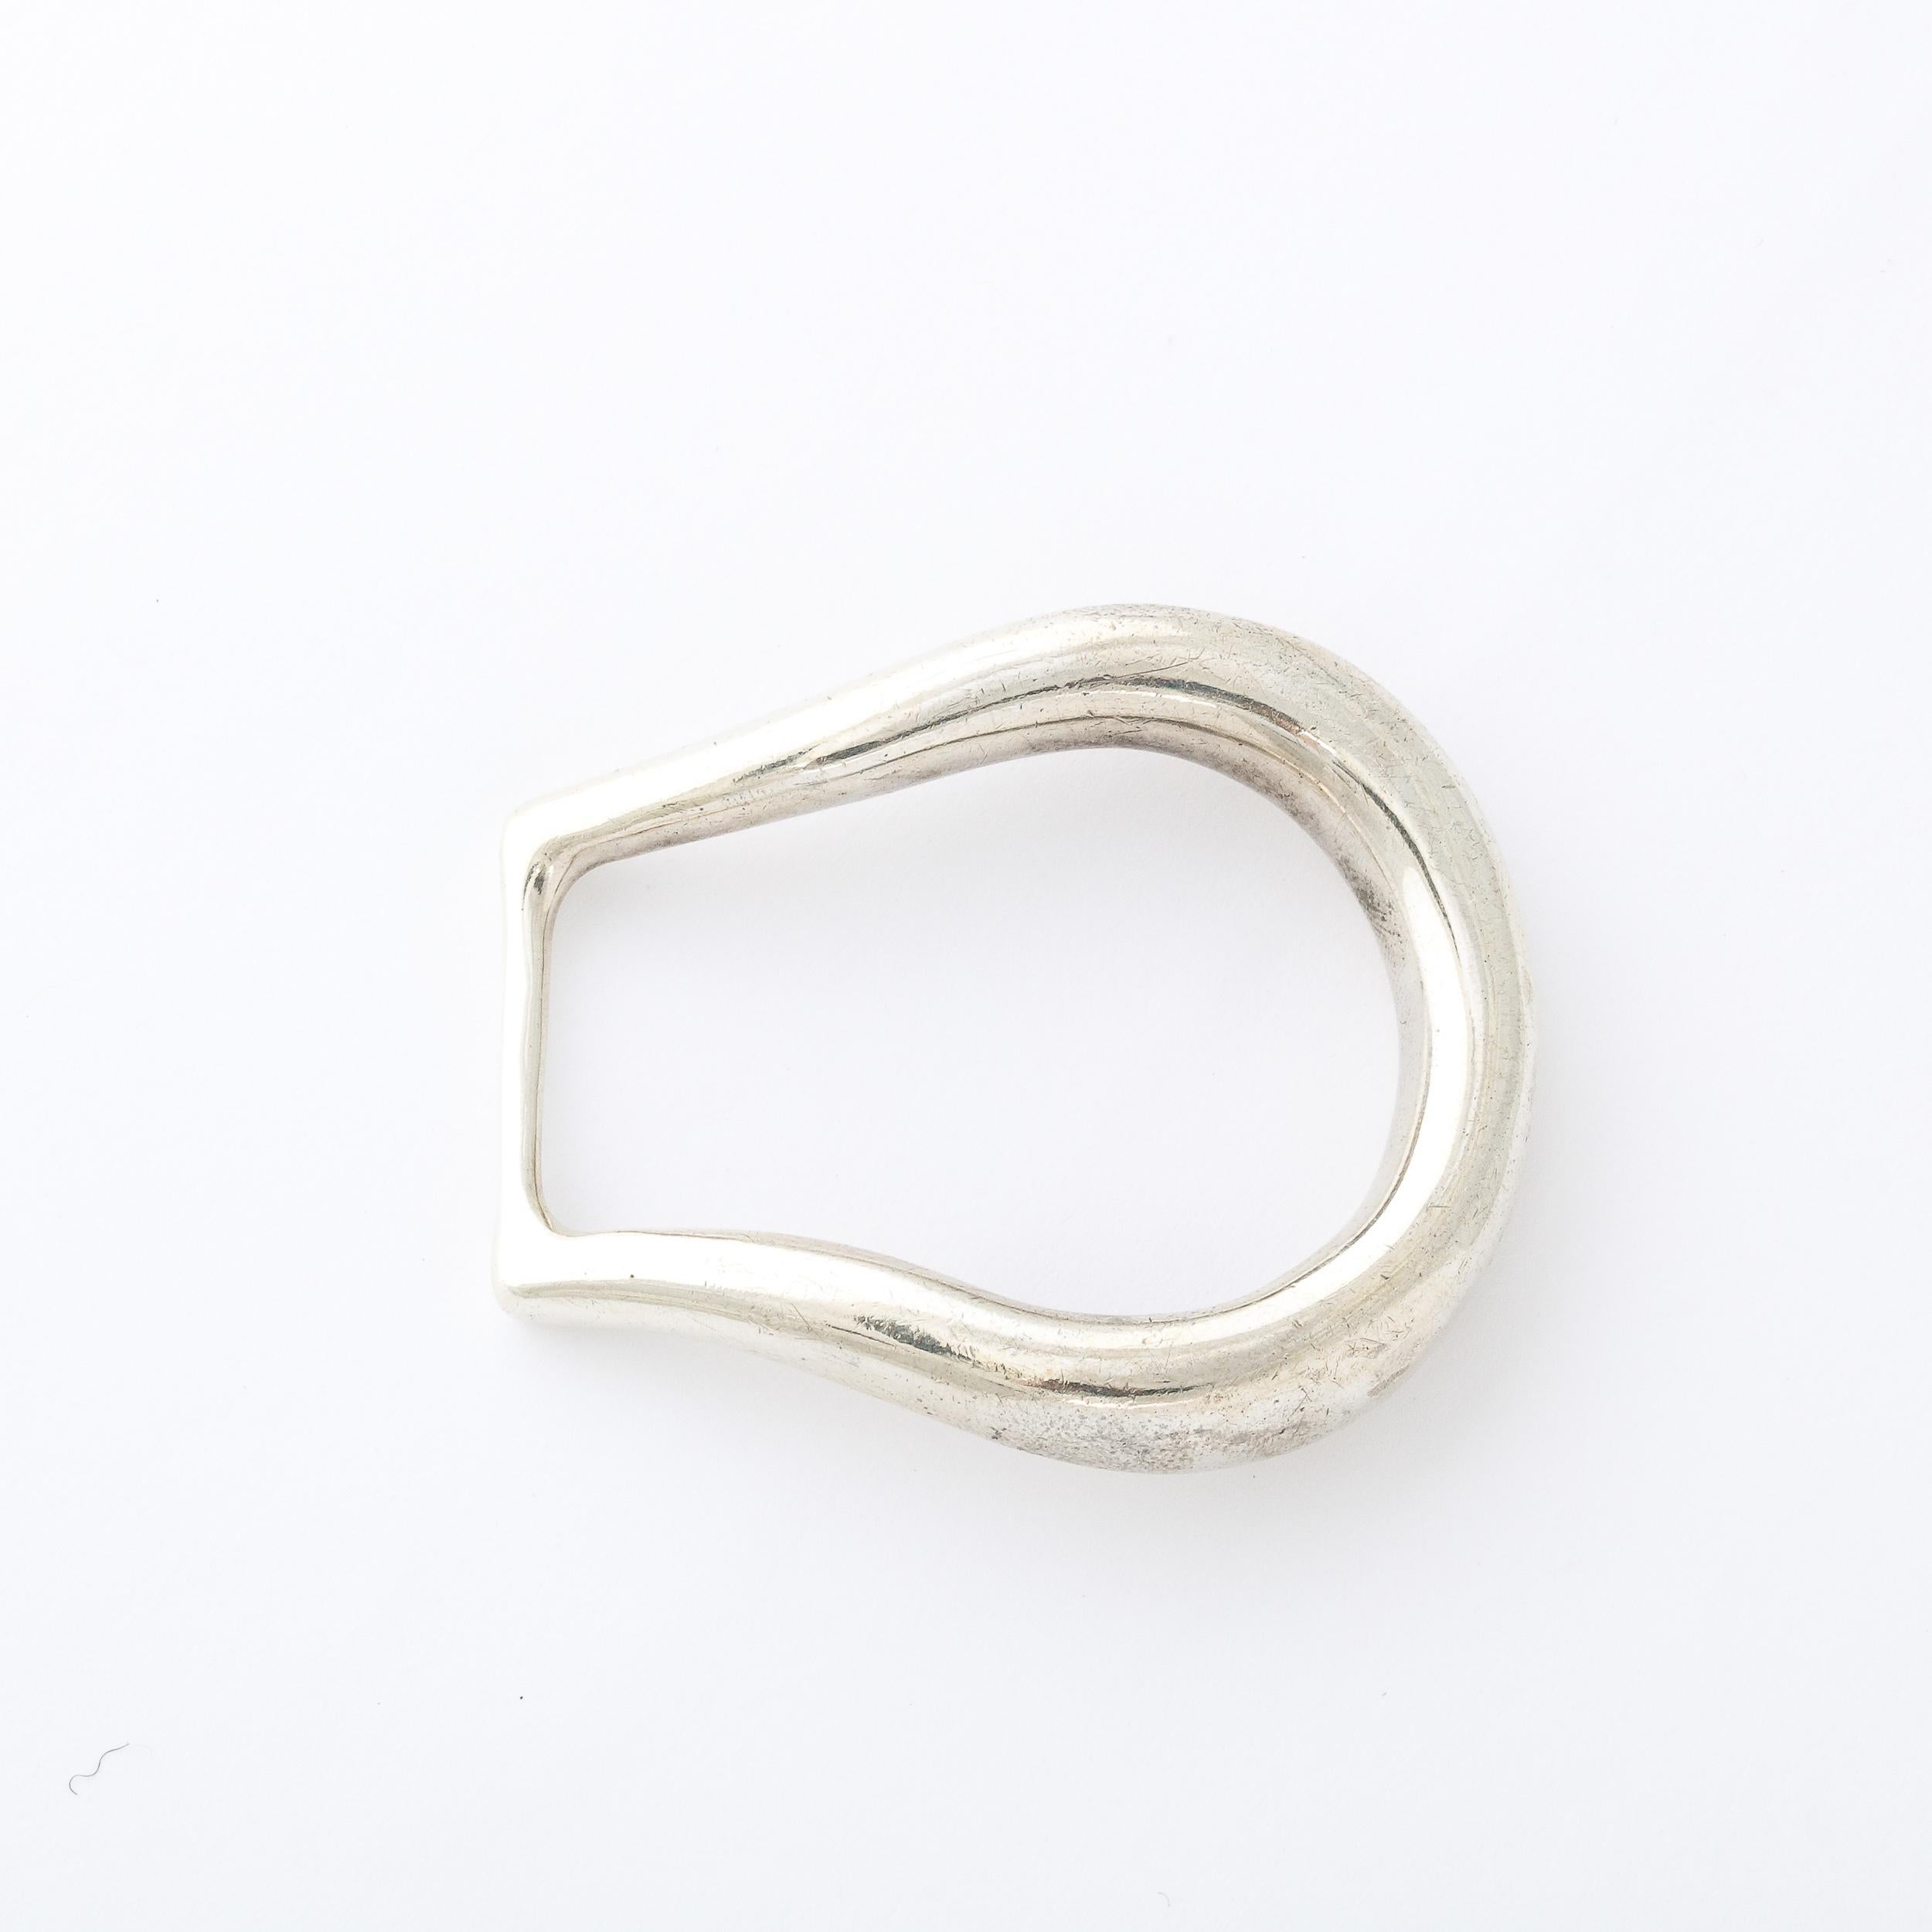 This Tiffany and Co. Sterling Silver Belt buckle is a lovely piece, originating from the United States during the latter half of the 20th Century. This modernist buckle is  formed with elegant simplicity. In solid sterling silver, this accessory